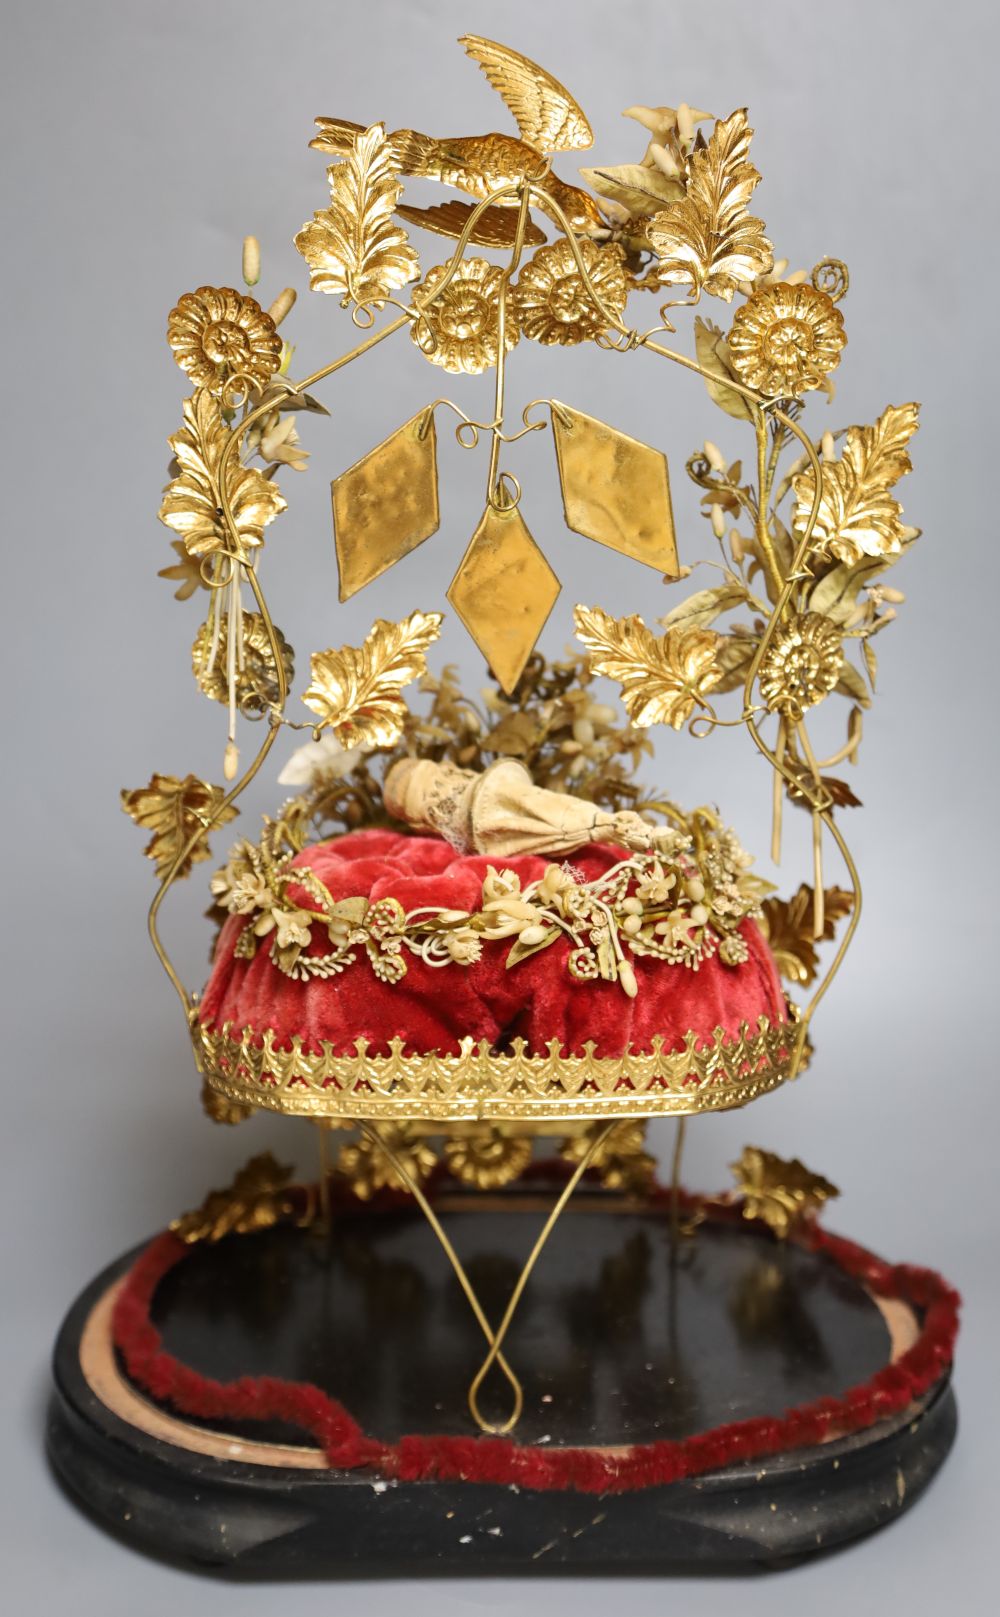 A late 19th century French wedding dome